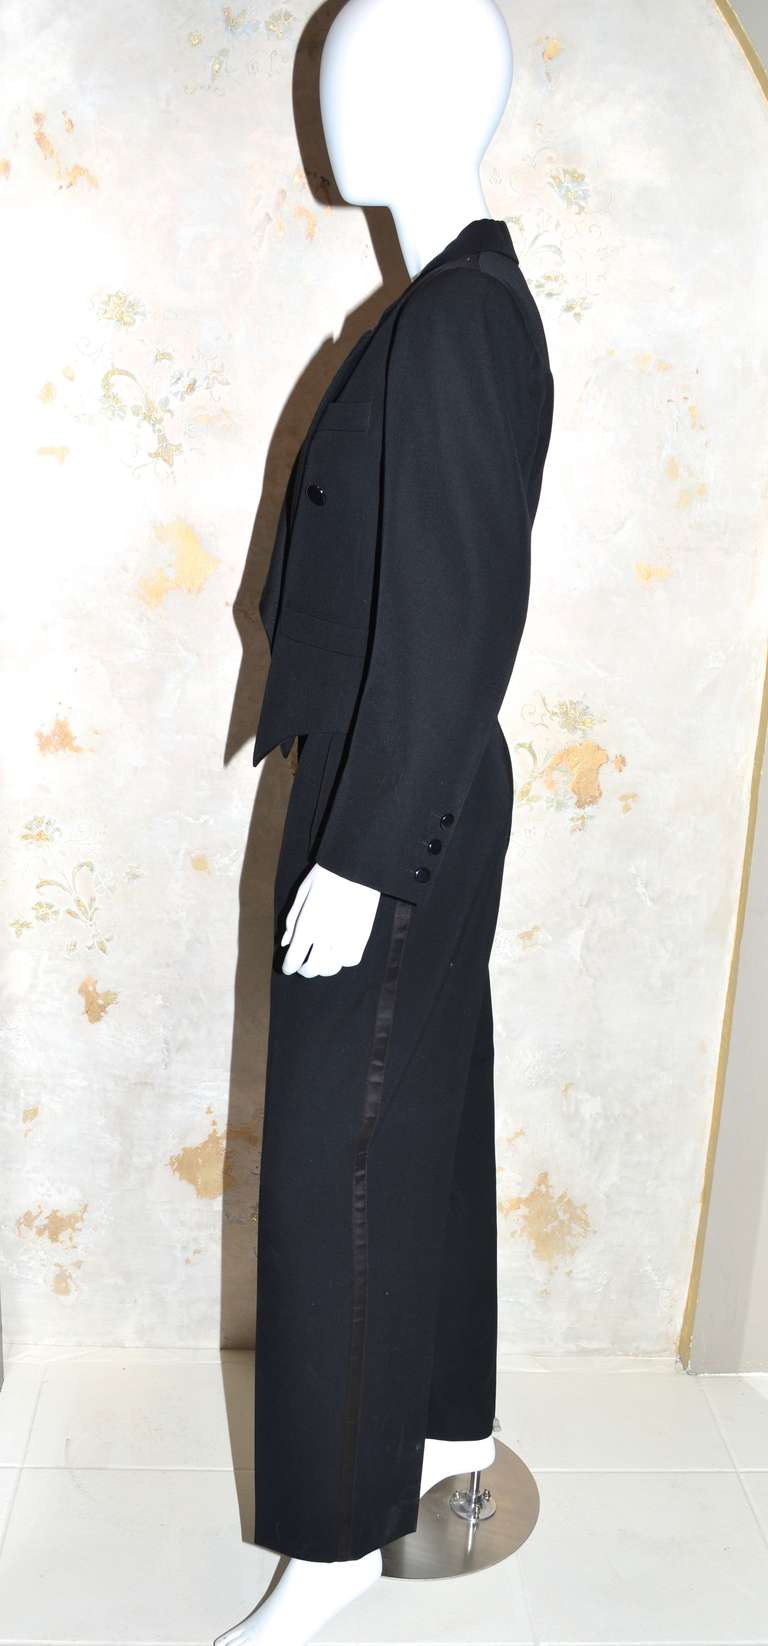 Yves Saint Laurent Vintage Late 1970's Early1980's Black Le Smoking Tuxedo Pantsuit
Wool with satin trim.
Jacket is a 42, Pants are a 40